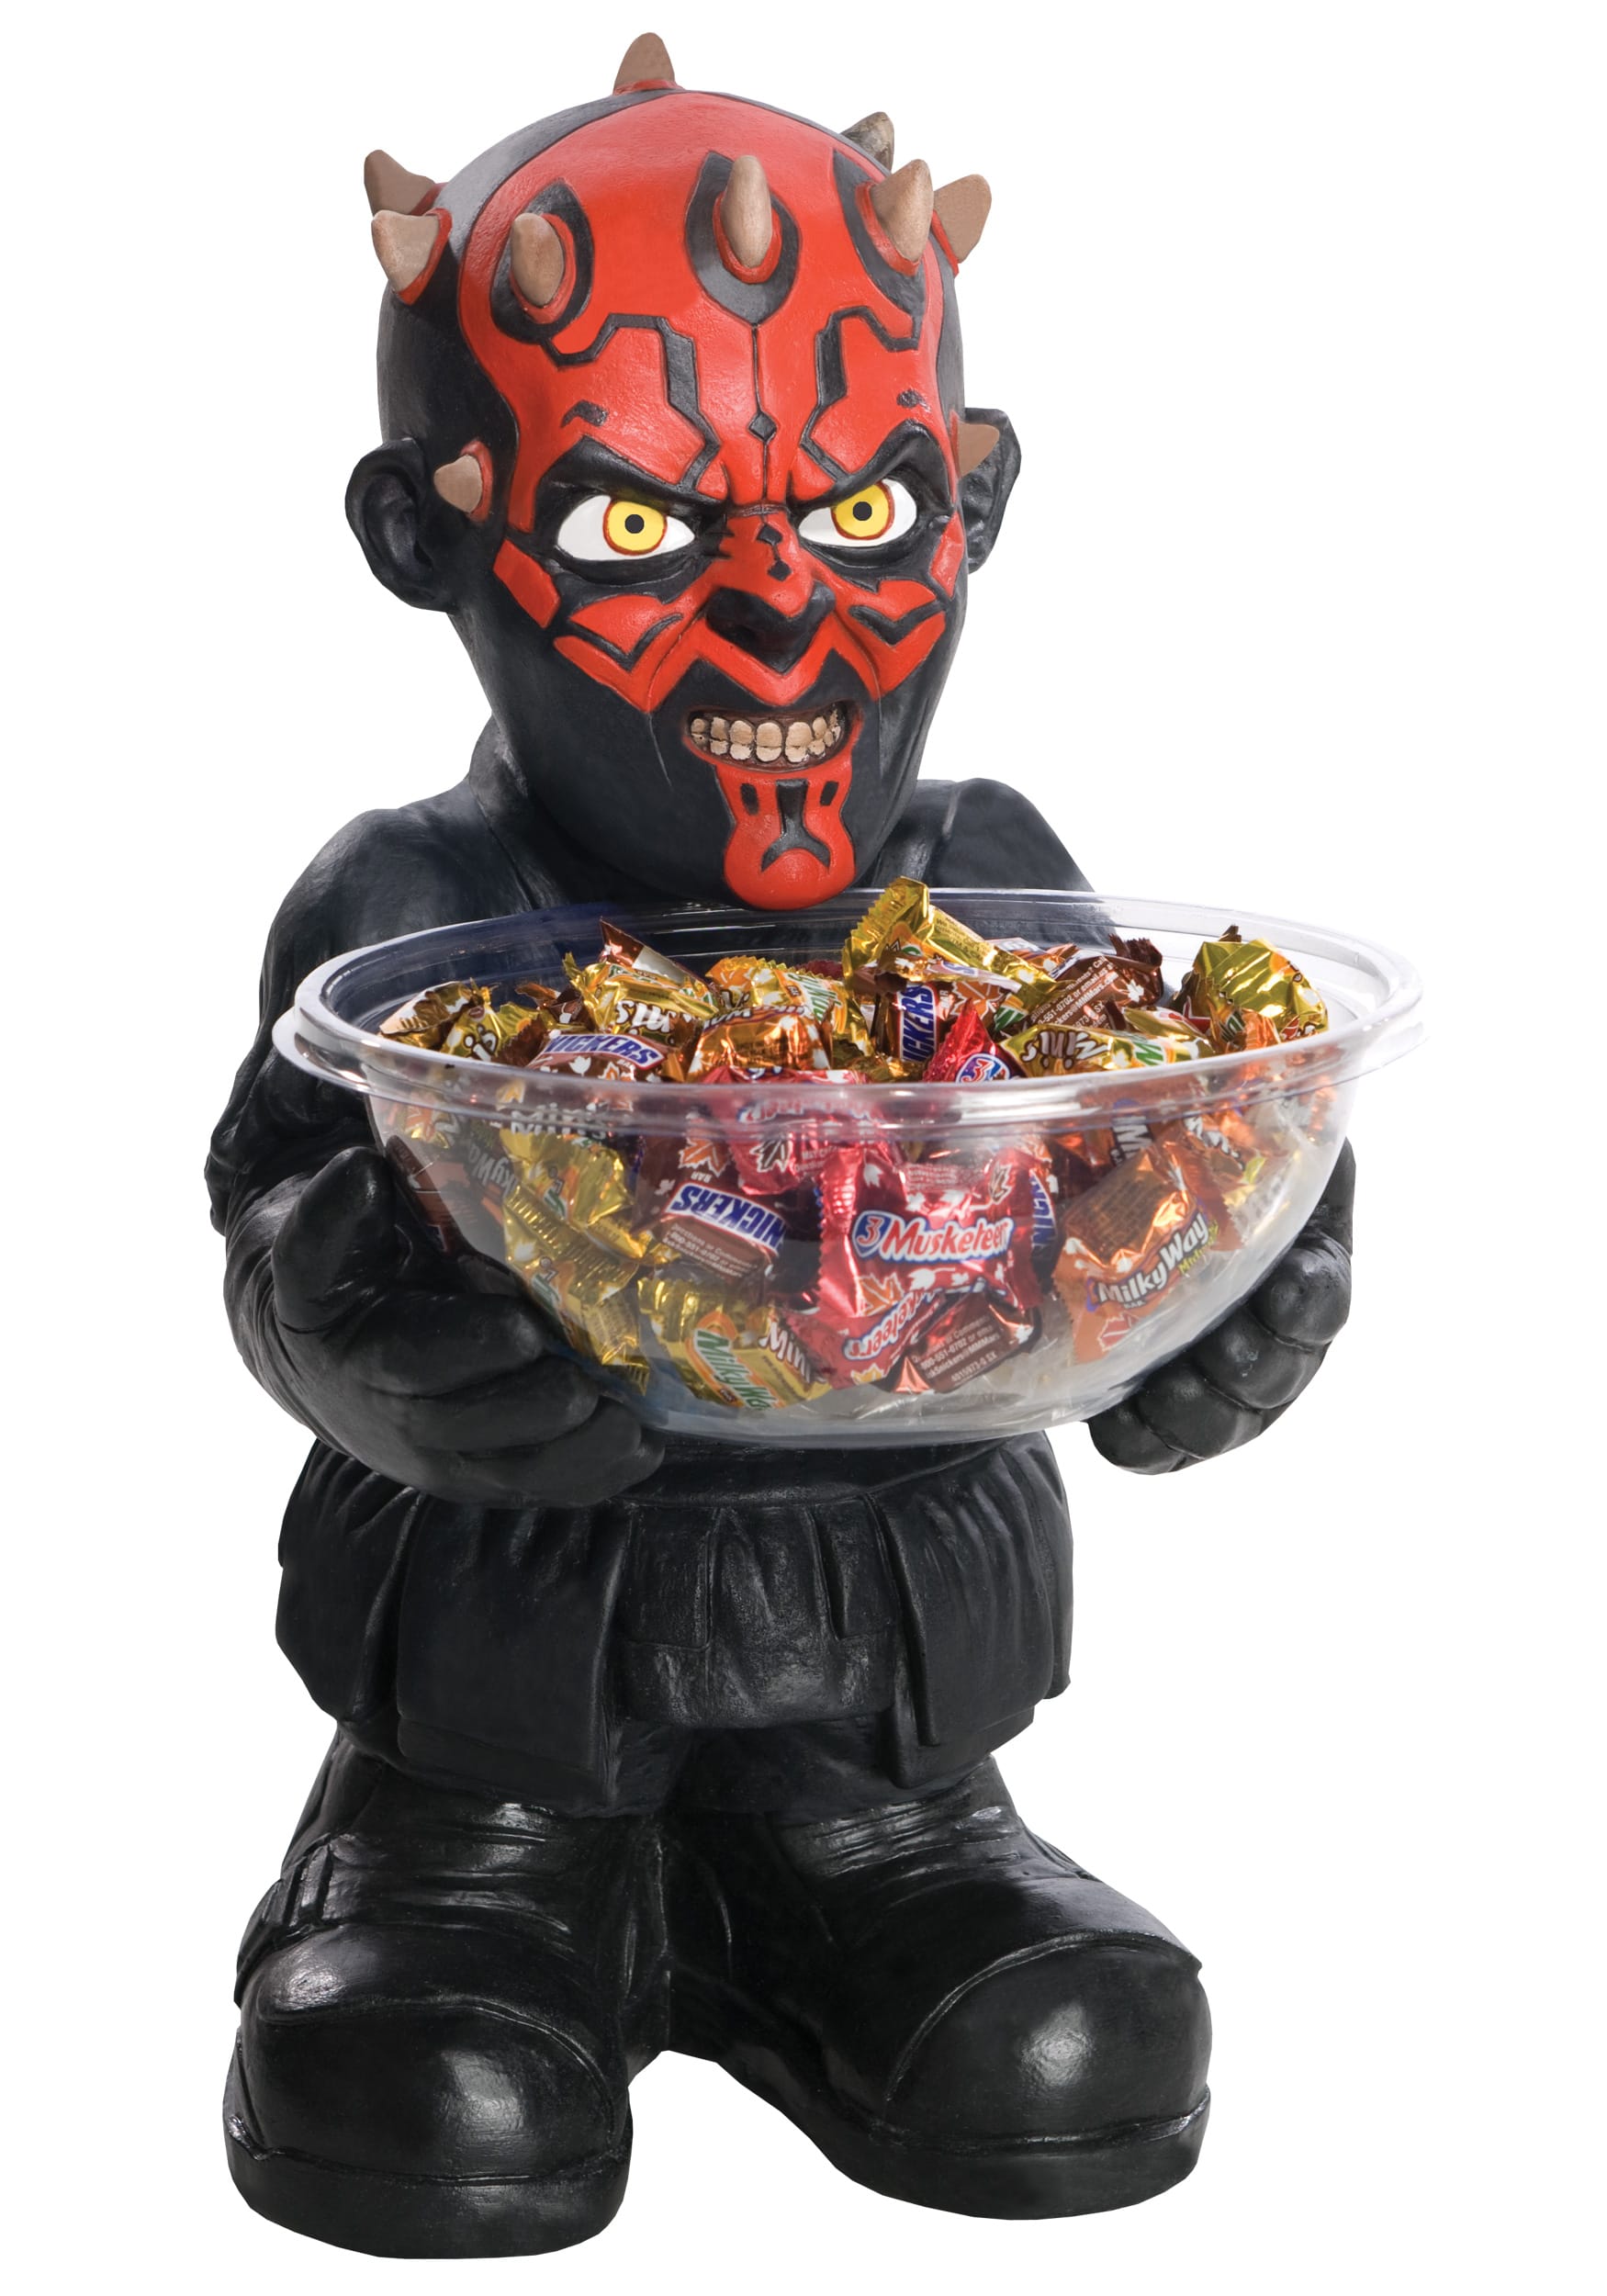 Star Wars Mini Character Candy Bowl Holders At Your Service